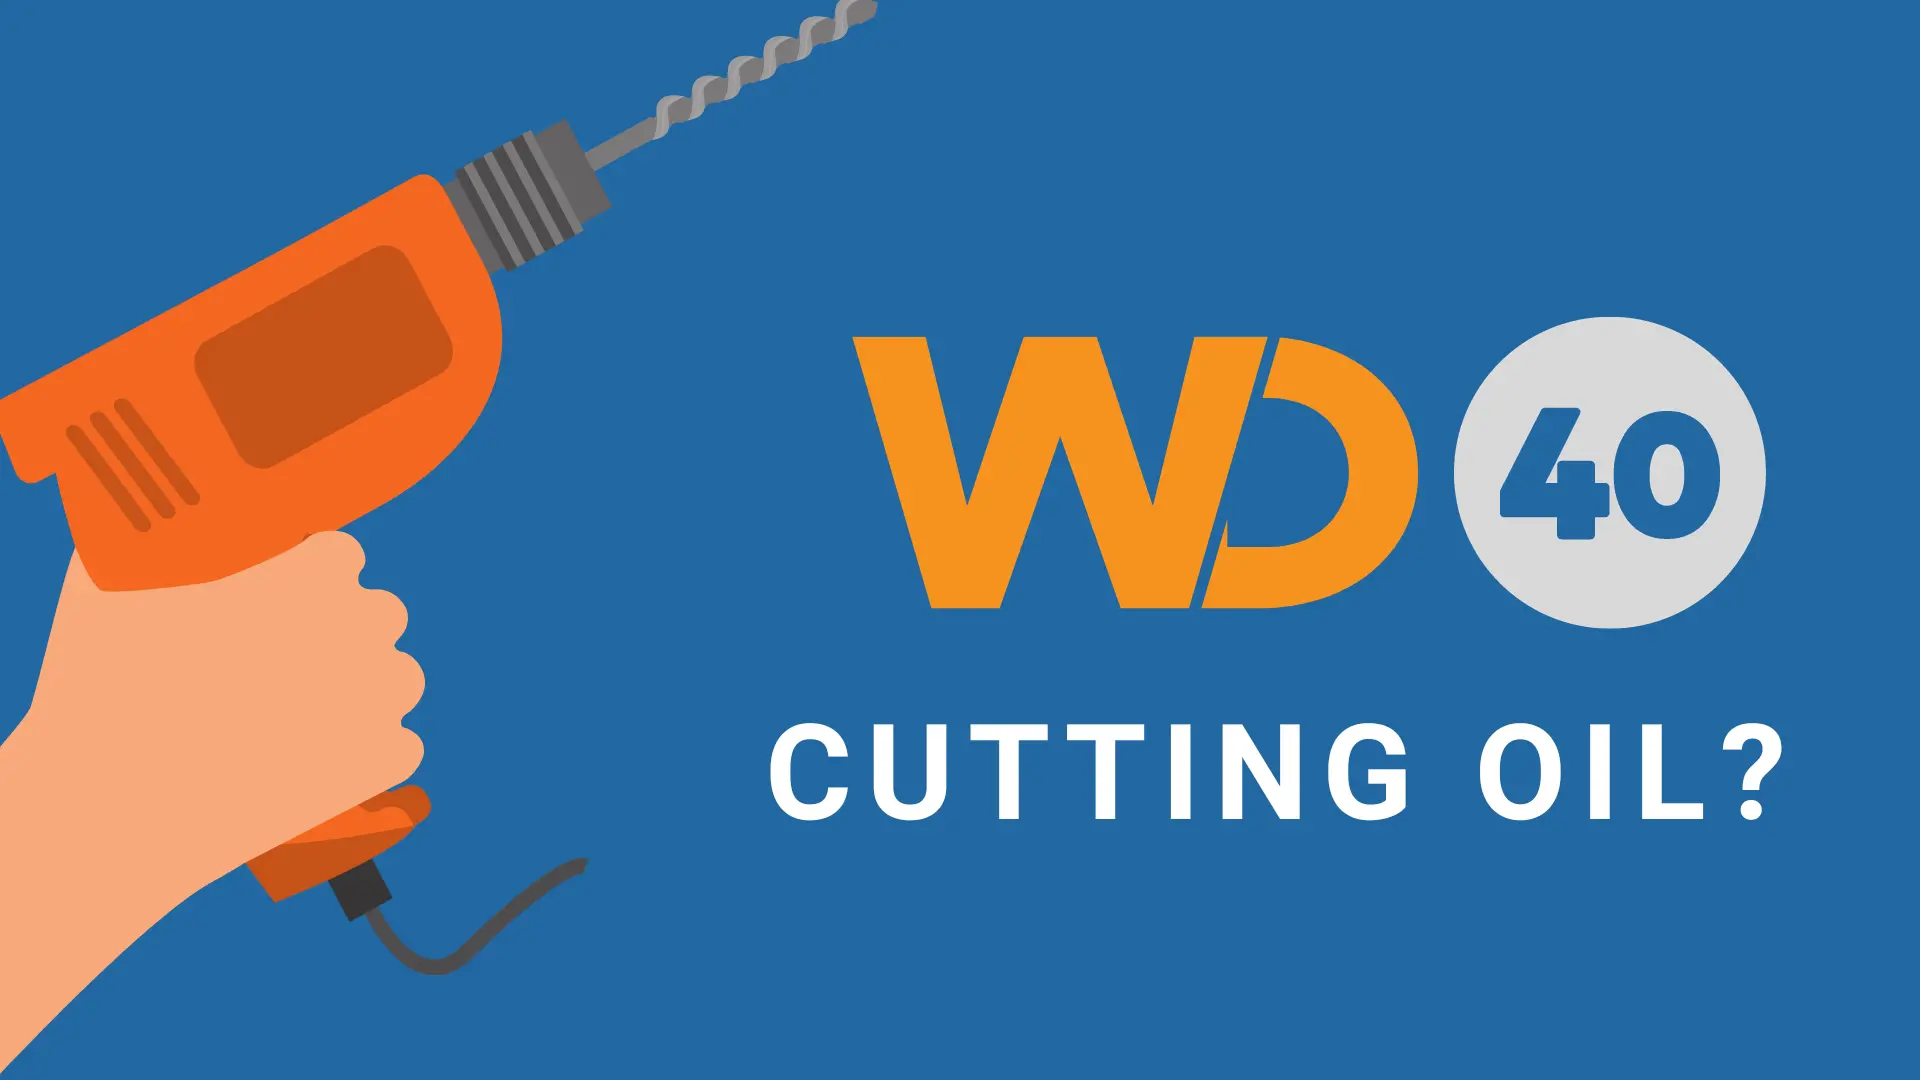 wd40 as cutting oil